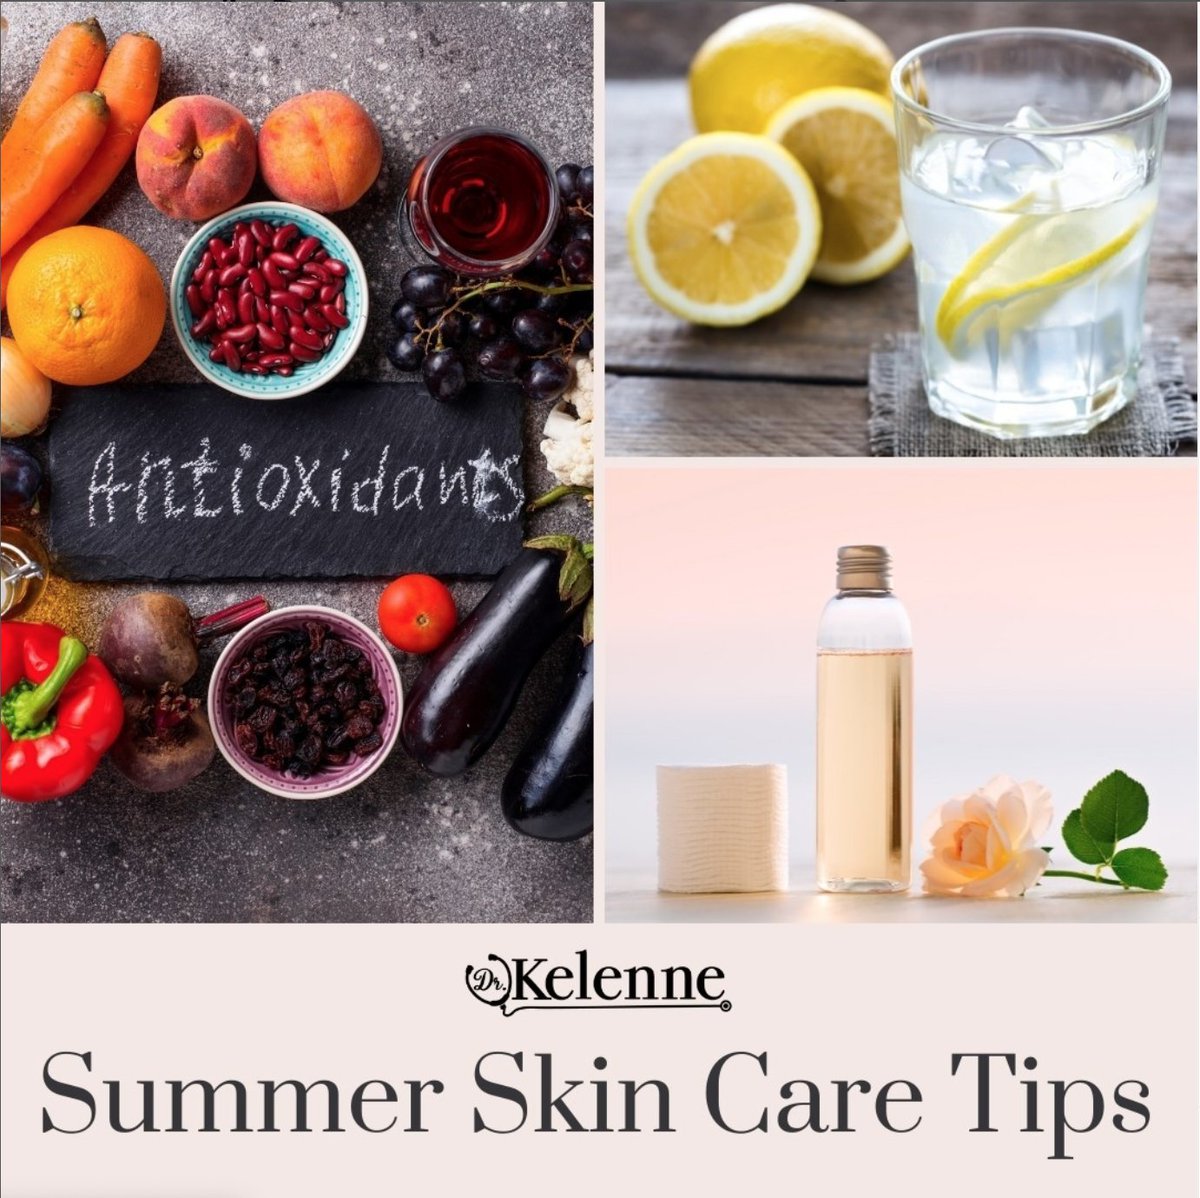 Keep your skin healthy for summer! Eat more antioxidants, stay hydrated, and use a refreshing toner. #healthcaretips #familymedicine #caribbean #blackdoctor #telemedicine #telehealth #yourcaribbeandoctor #skincancerawareness 🇹🇹🇻🇨🇵🇷🇦🇬🇧🇸🇧🇧🇧🇷🇨🇦🇫🇰🇬🇩🇬🇾🇯🇲🇭🇹🇱🇨🇰🇳